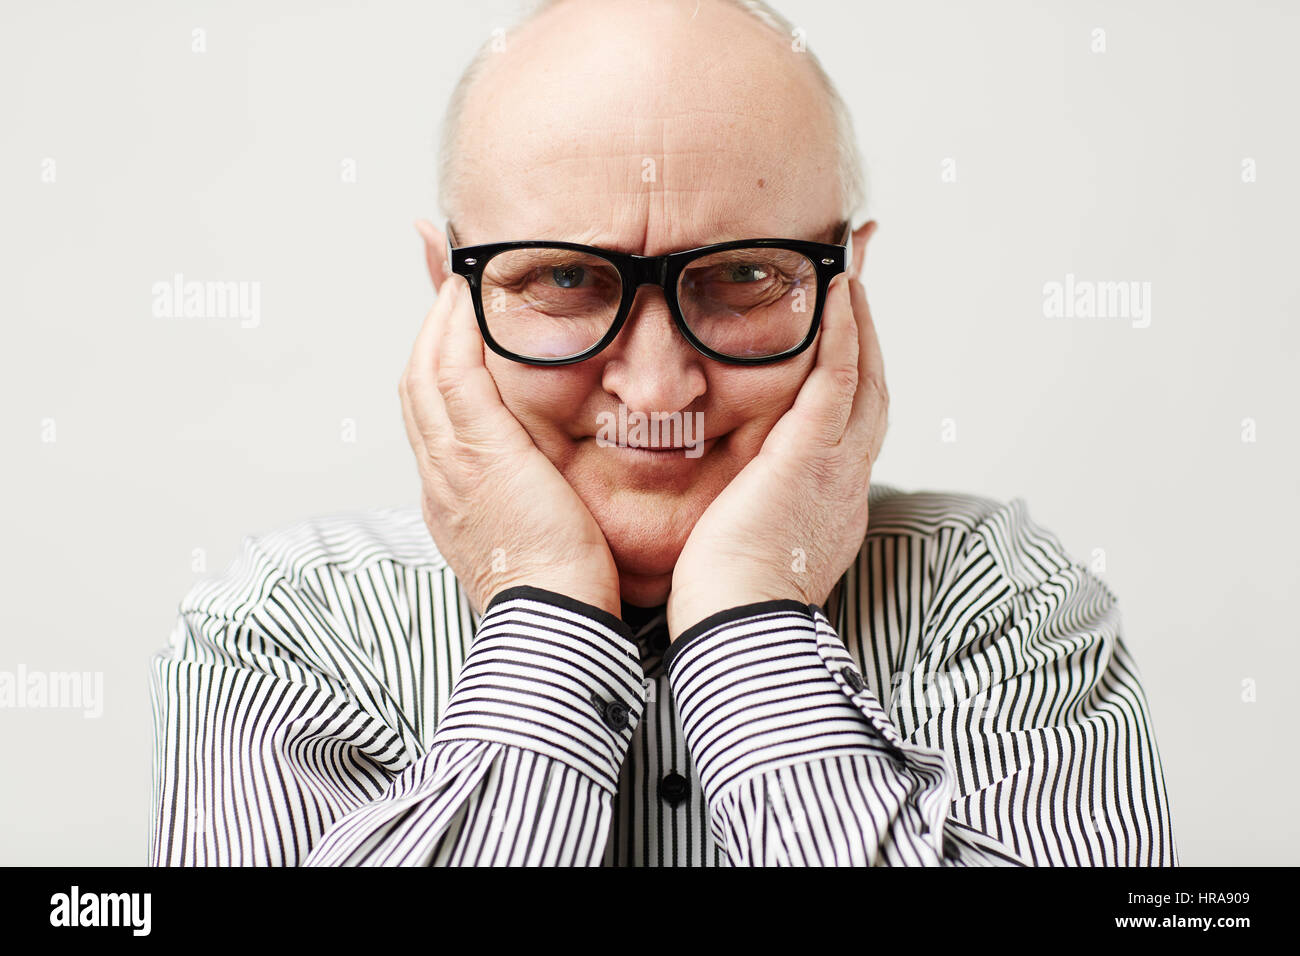 Portrait of charming aged man in eyeglasses and striped shirt making funny face by squishing cheeks with his hands Stock Photo